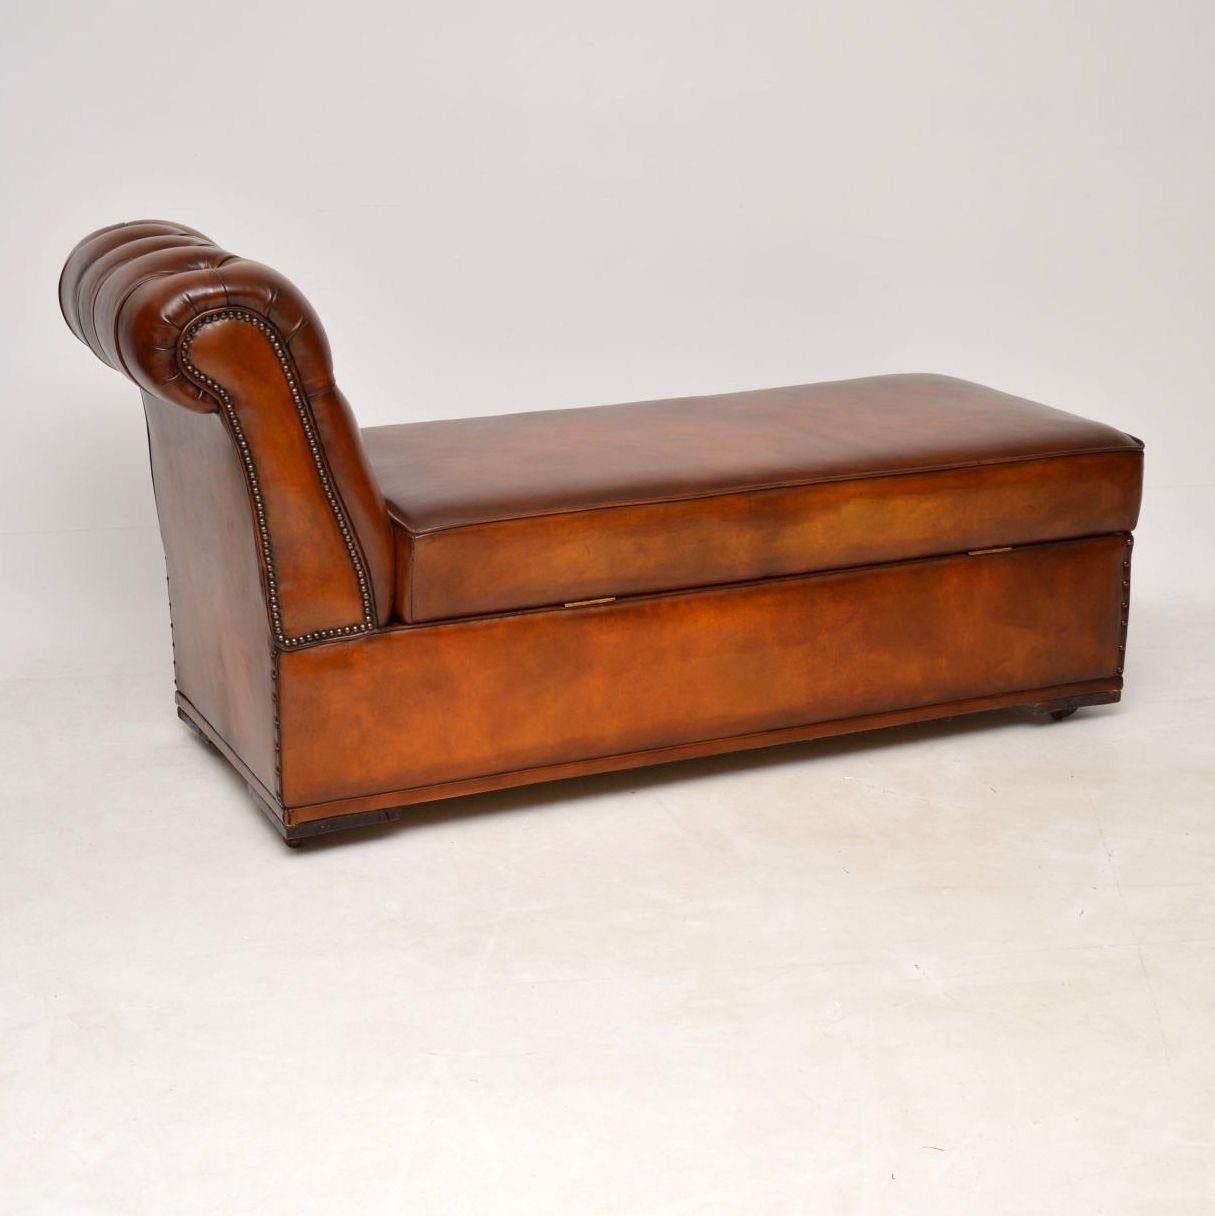  Antique Victorian Leather Chaise Lounge Ottoman 2